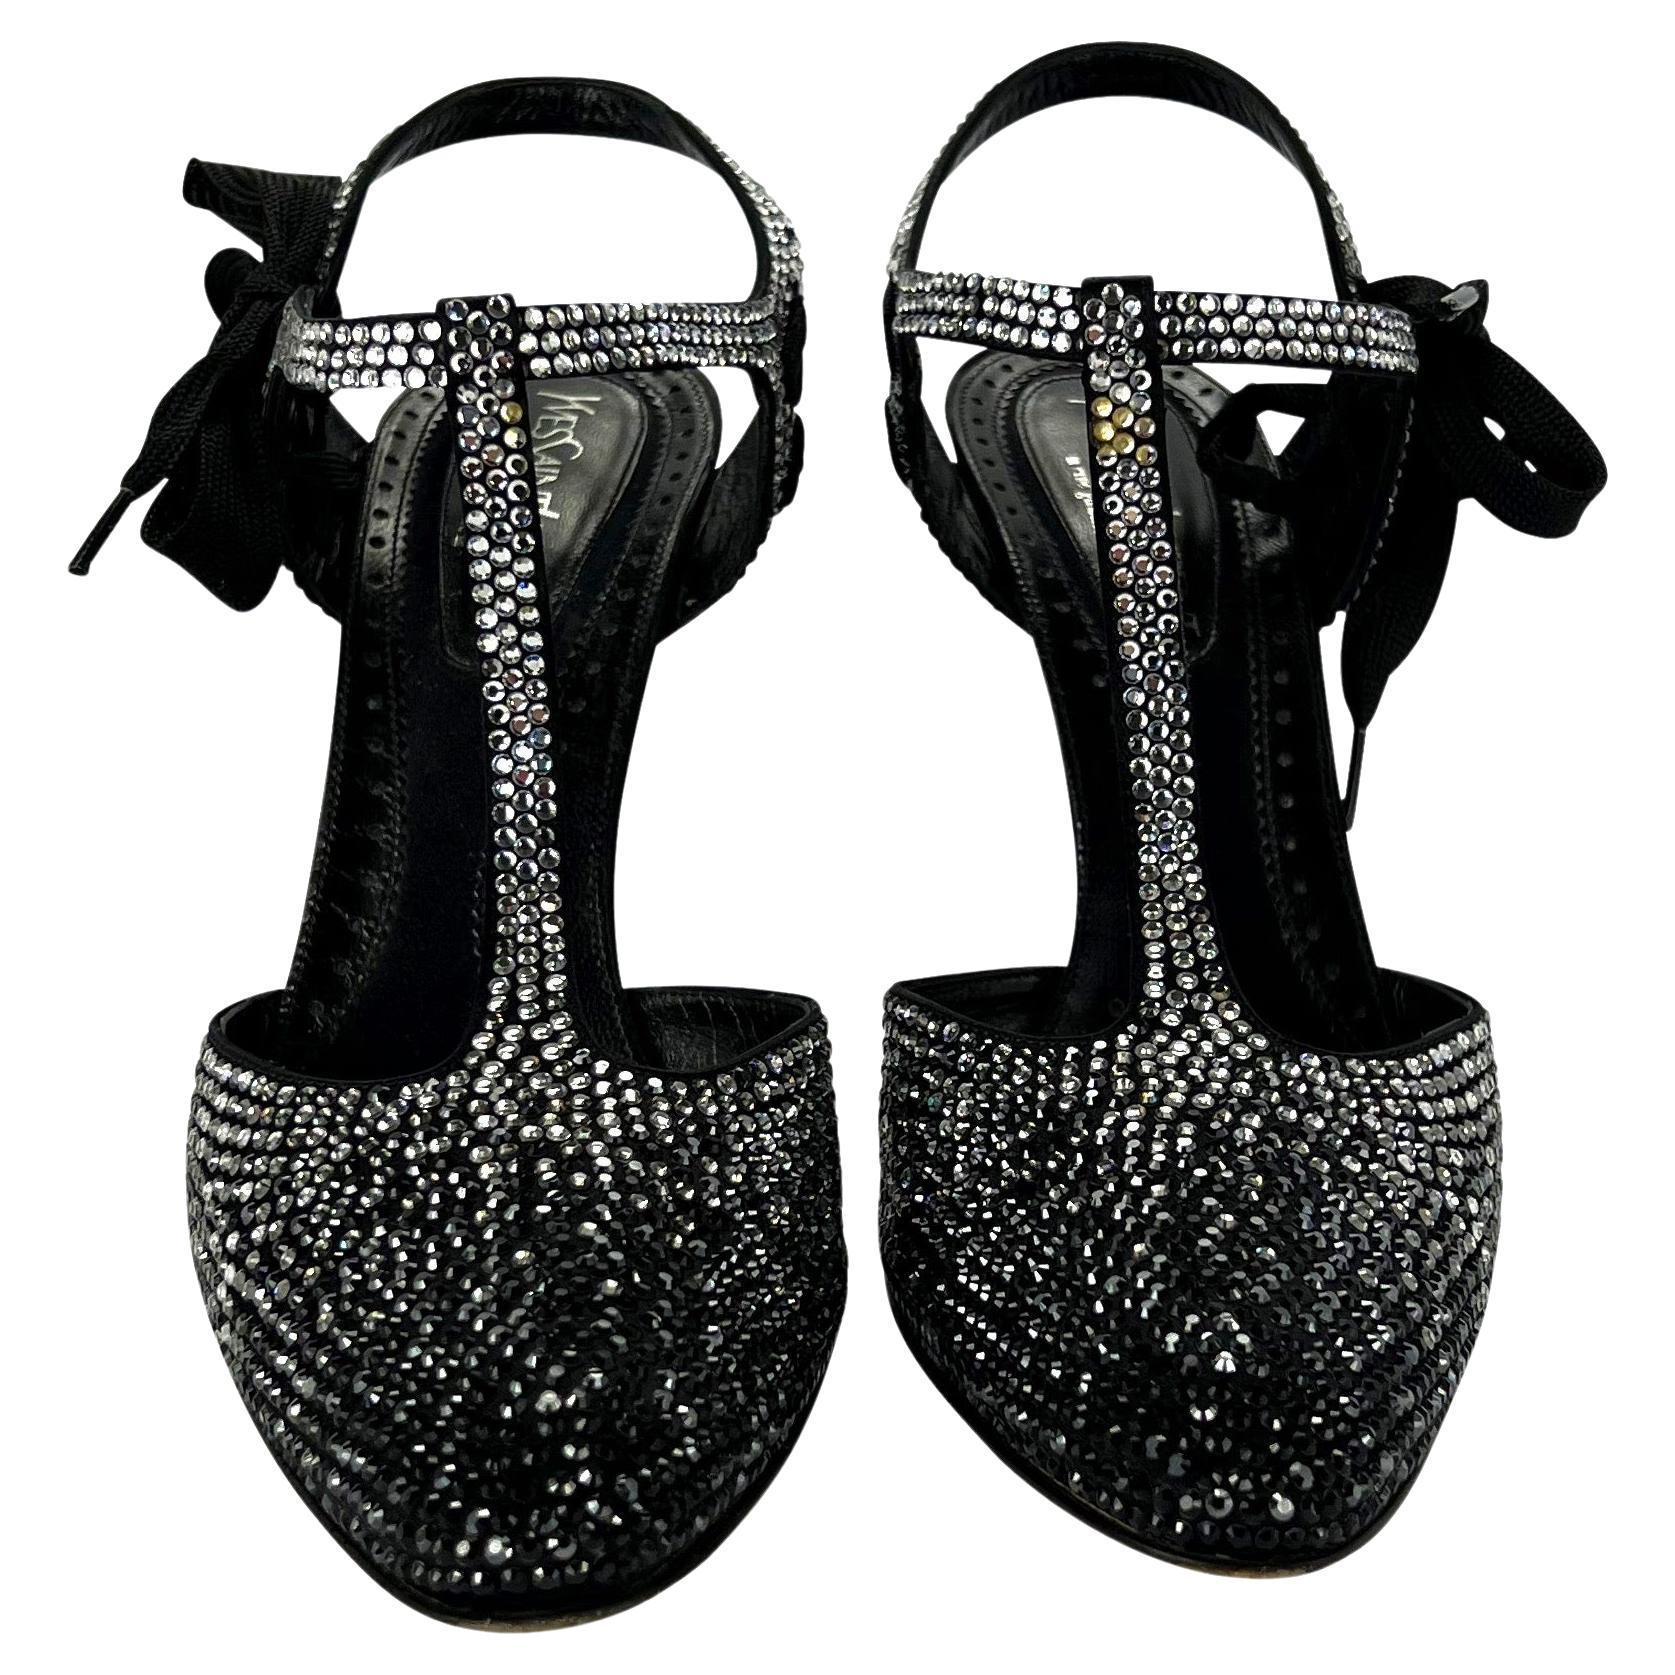 S/S 2004 Yves Saint Laurent by Tom Ford Swarovski Rhinestone Spectator Heels In Good Condition In West Hollywood, CA